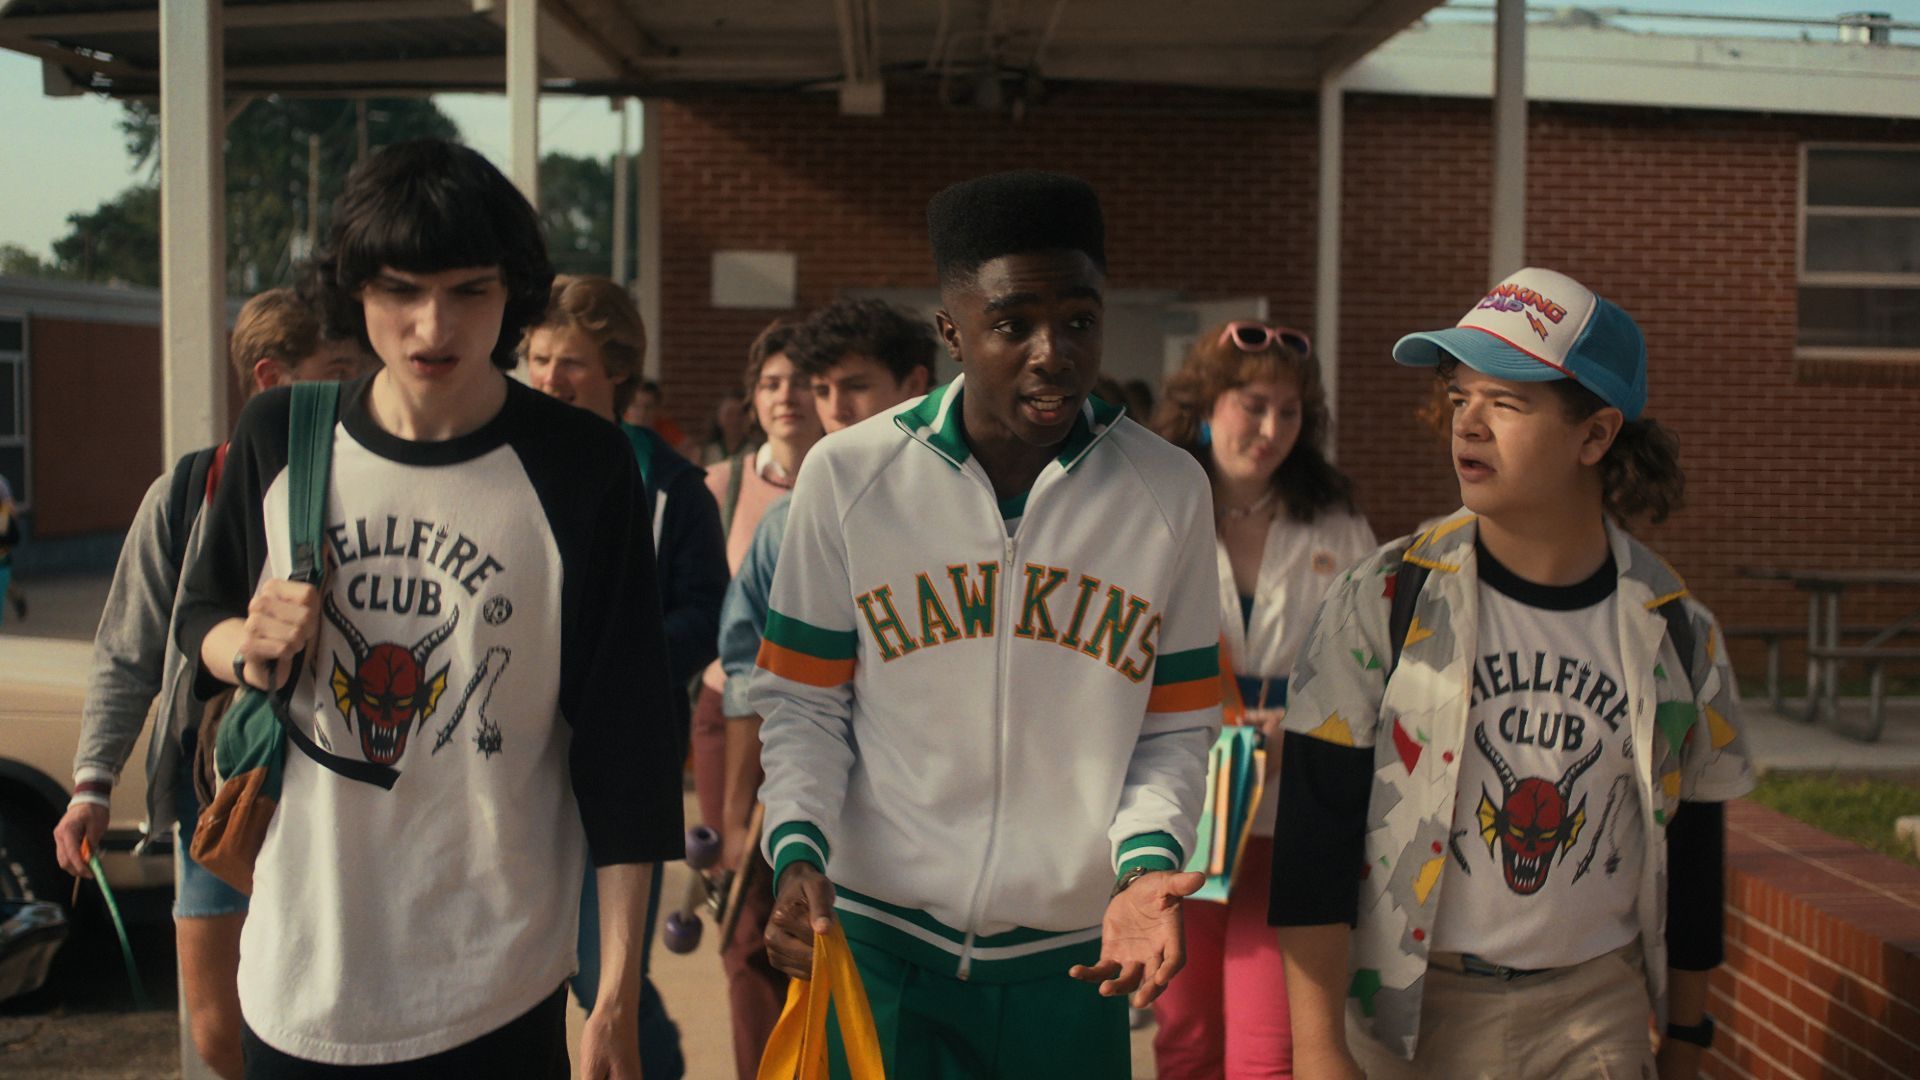 A group of high schoolers, including Steve, walk towards the camera. - Stranger Things